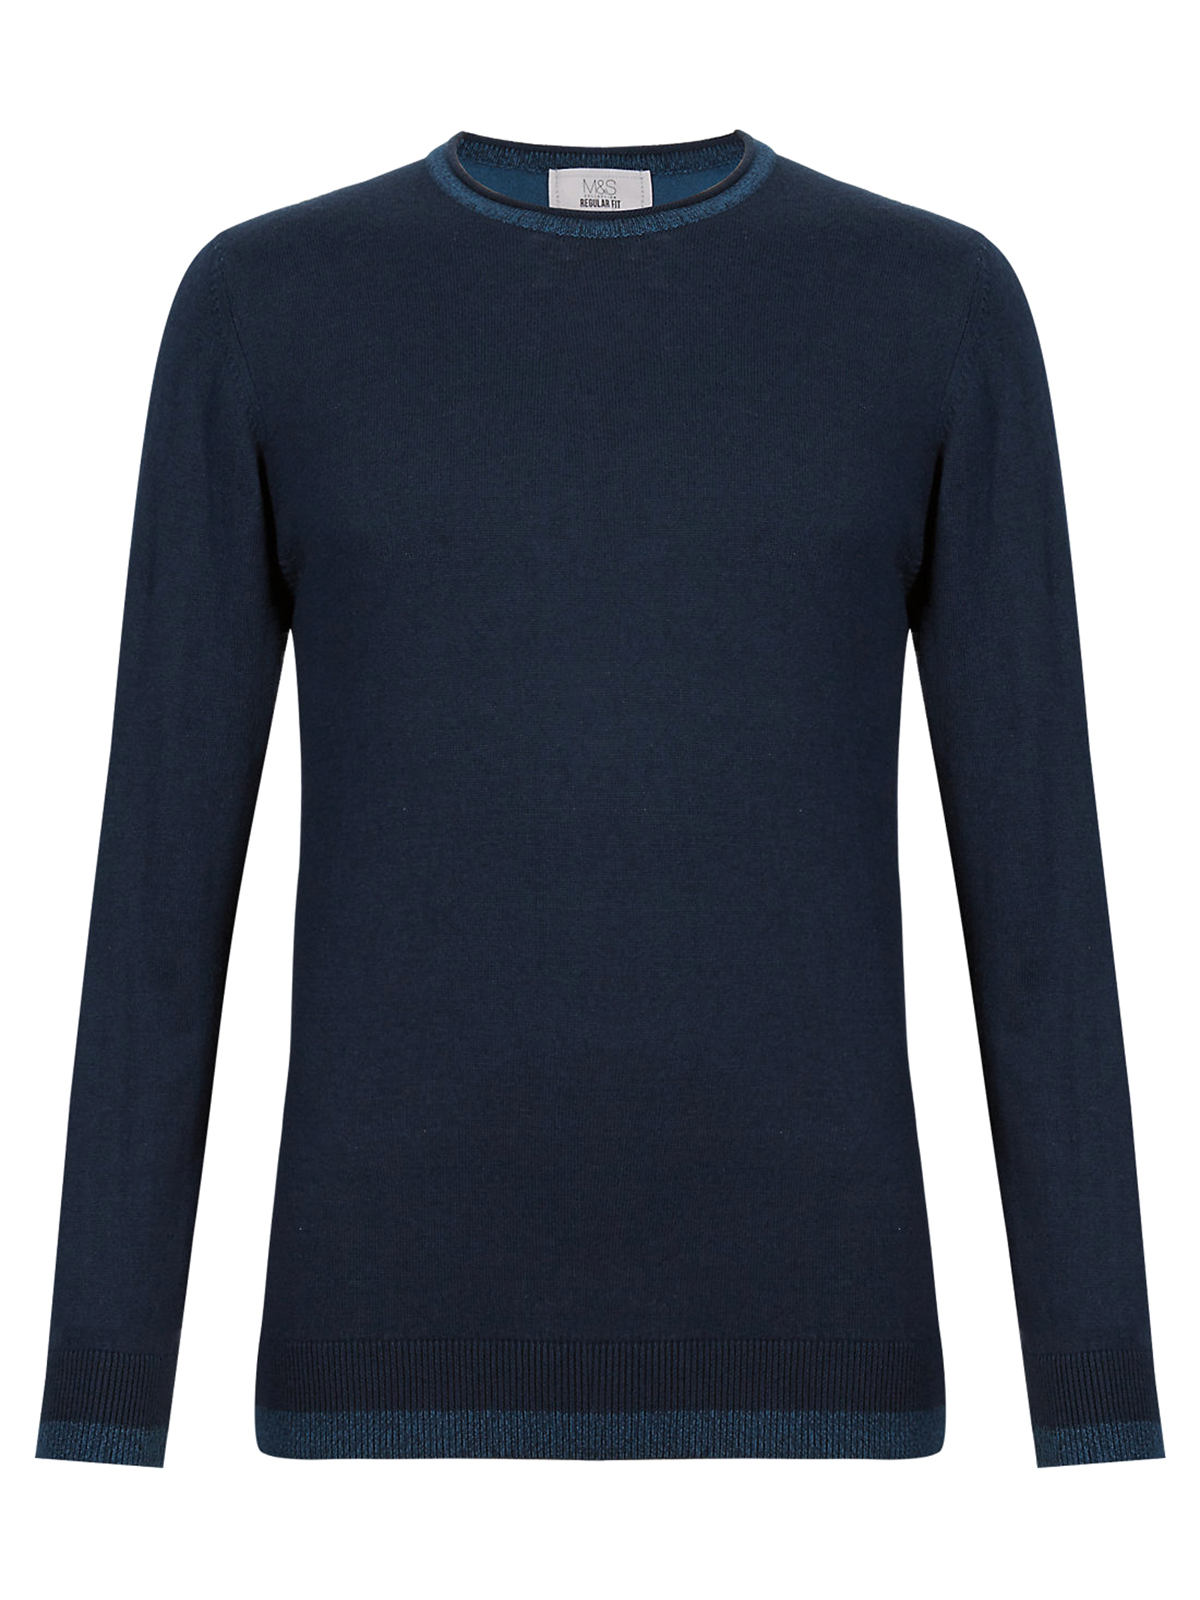 Marks and Spencer - - M&5 Blue Mix Twist Colour Block Crew Neck Jumper ...